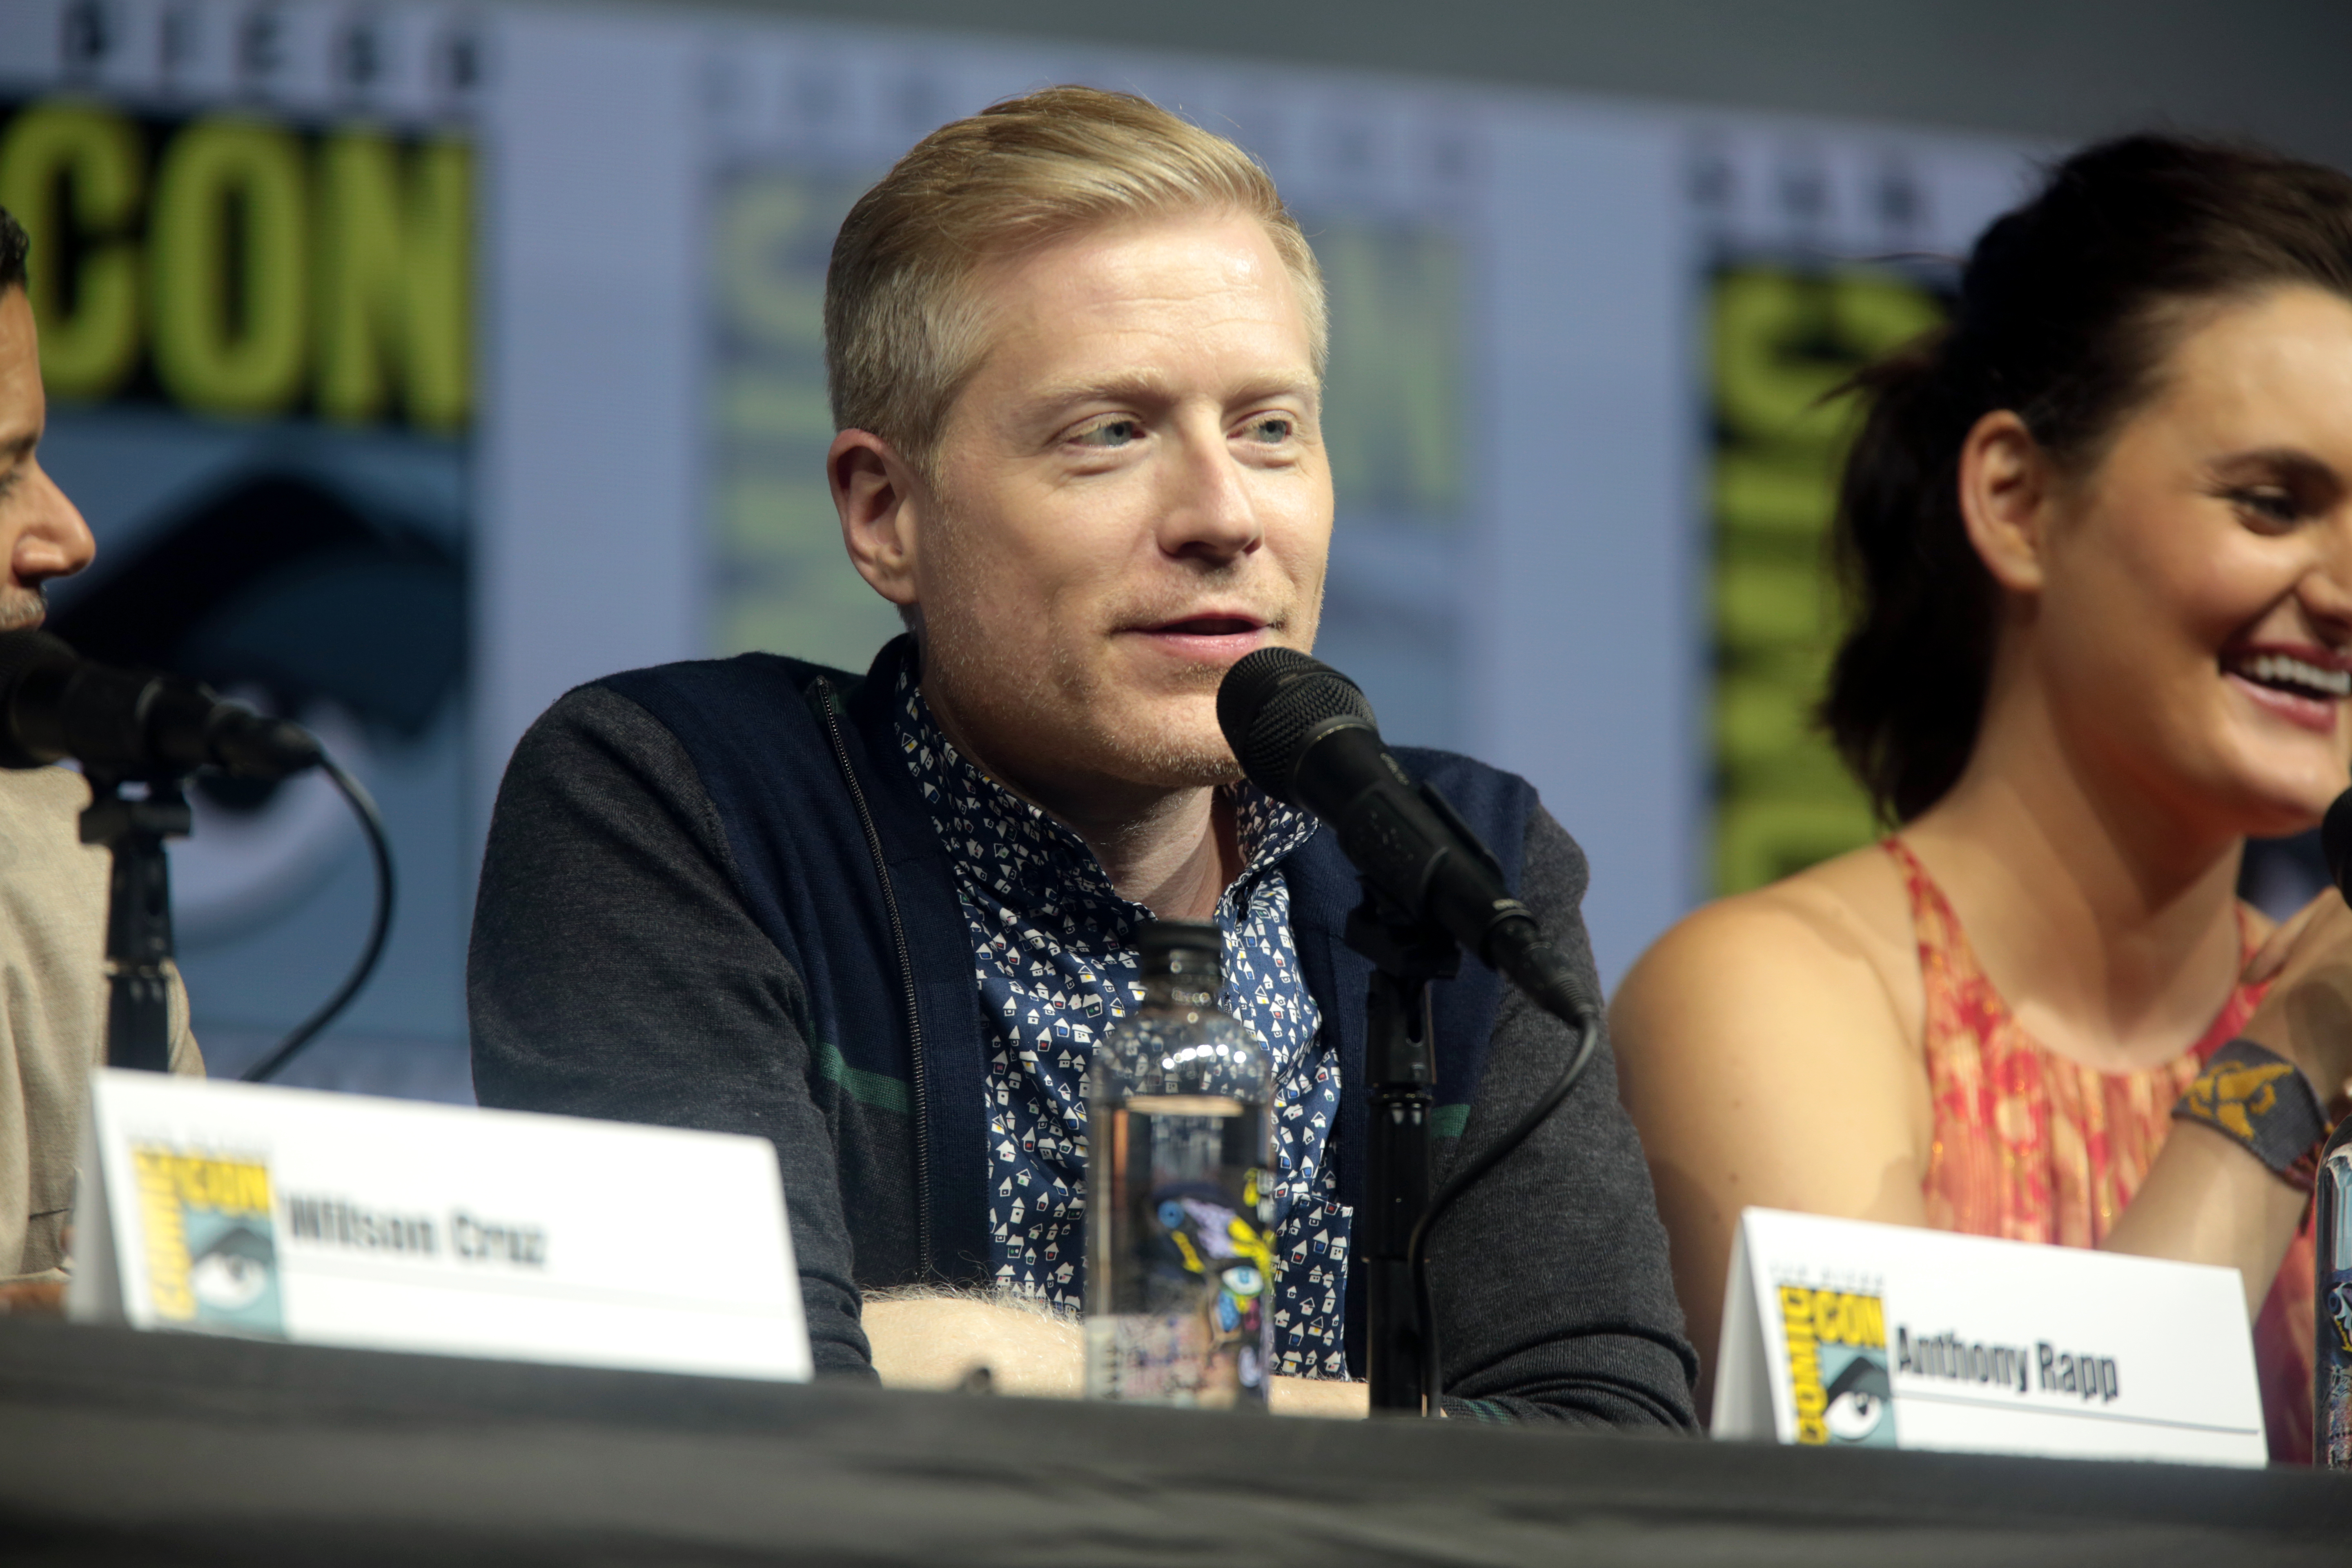 Anthony Rapp auf der San Diego Comic Con 2018
Gage Skidmore from Peoria, AZ, United States of America [CC BY-SA 2.0 (https://creativecommons.org/licenses/by-sa/2.0)], via Wikimedia Commons